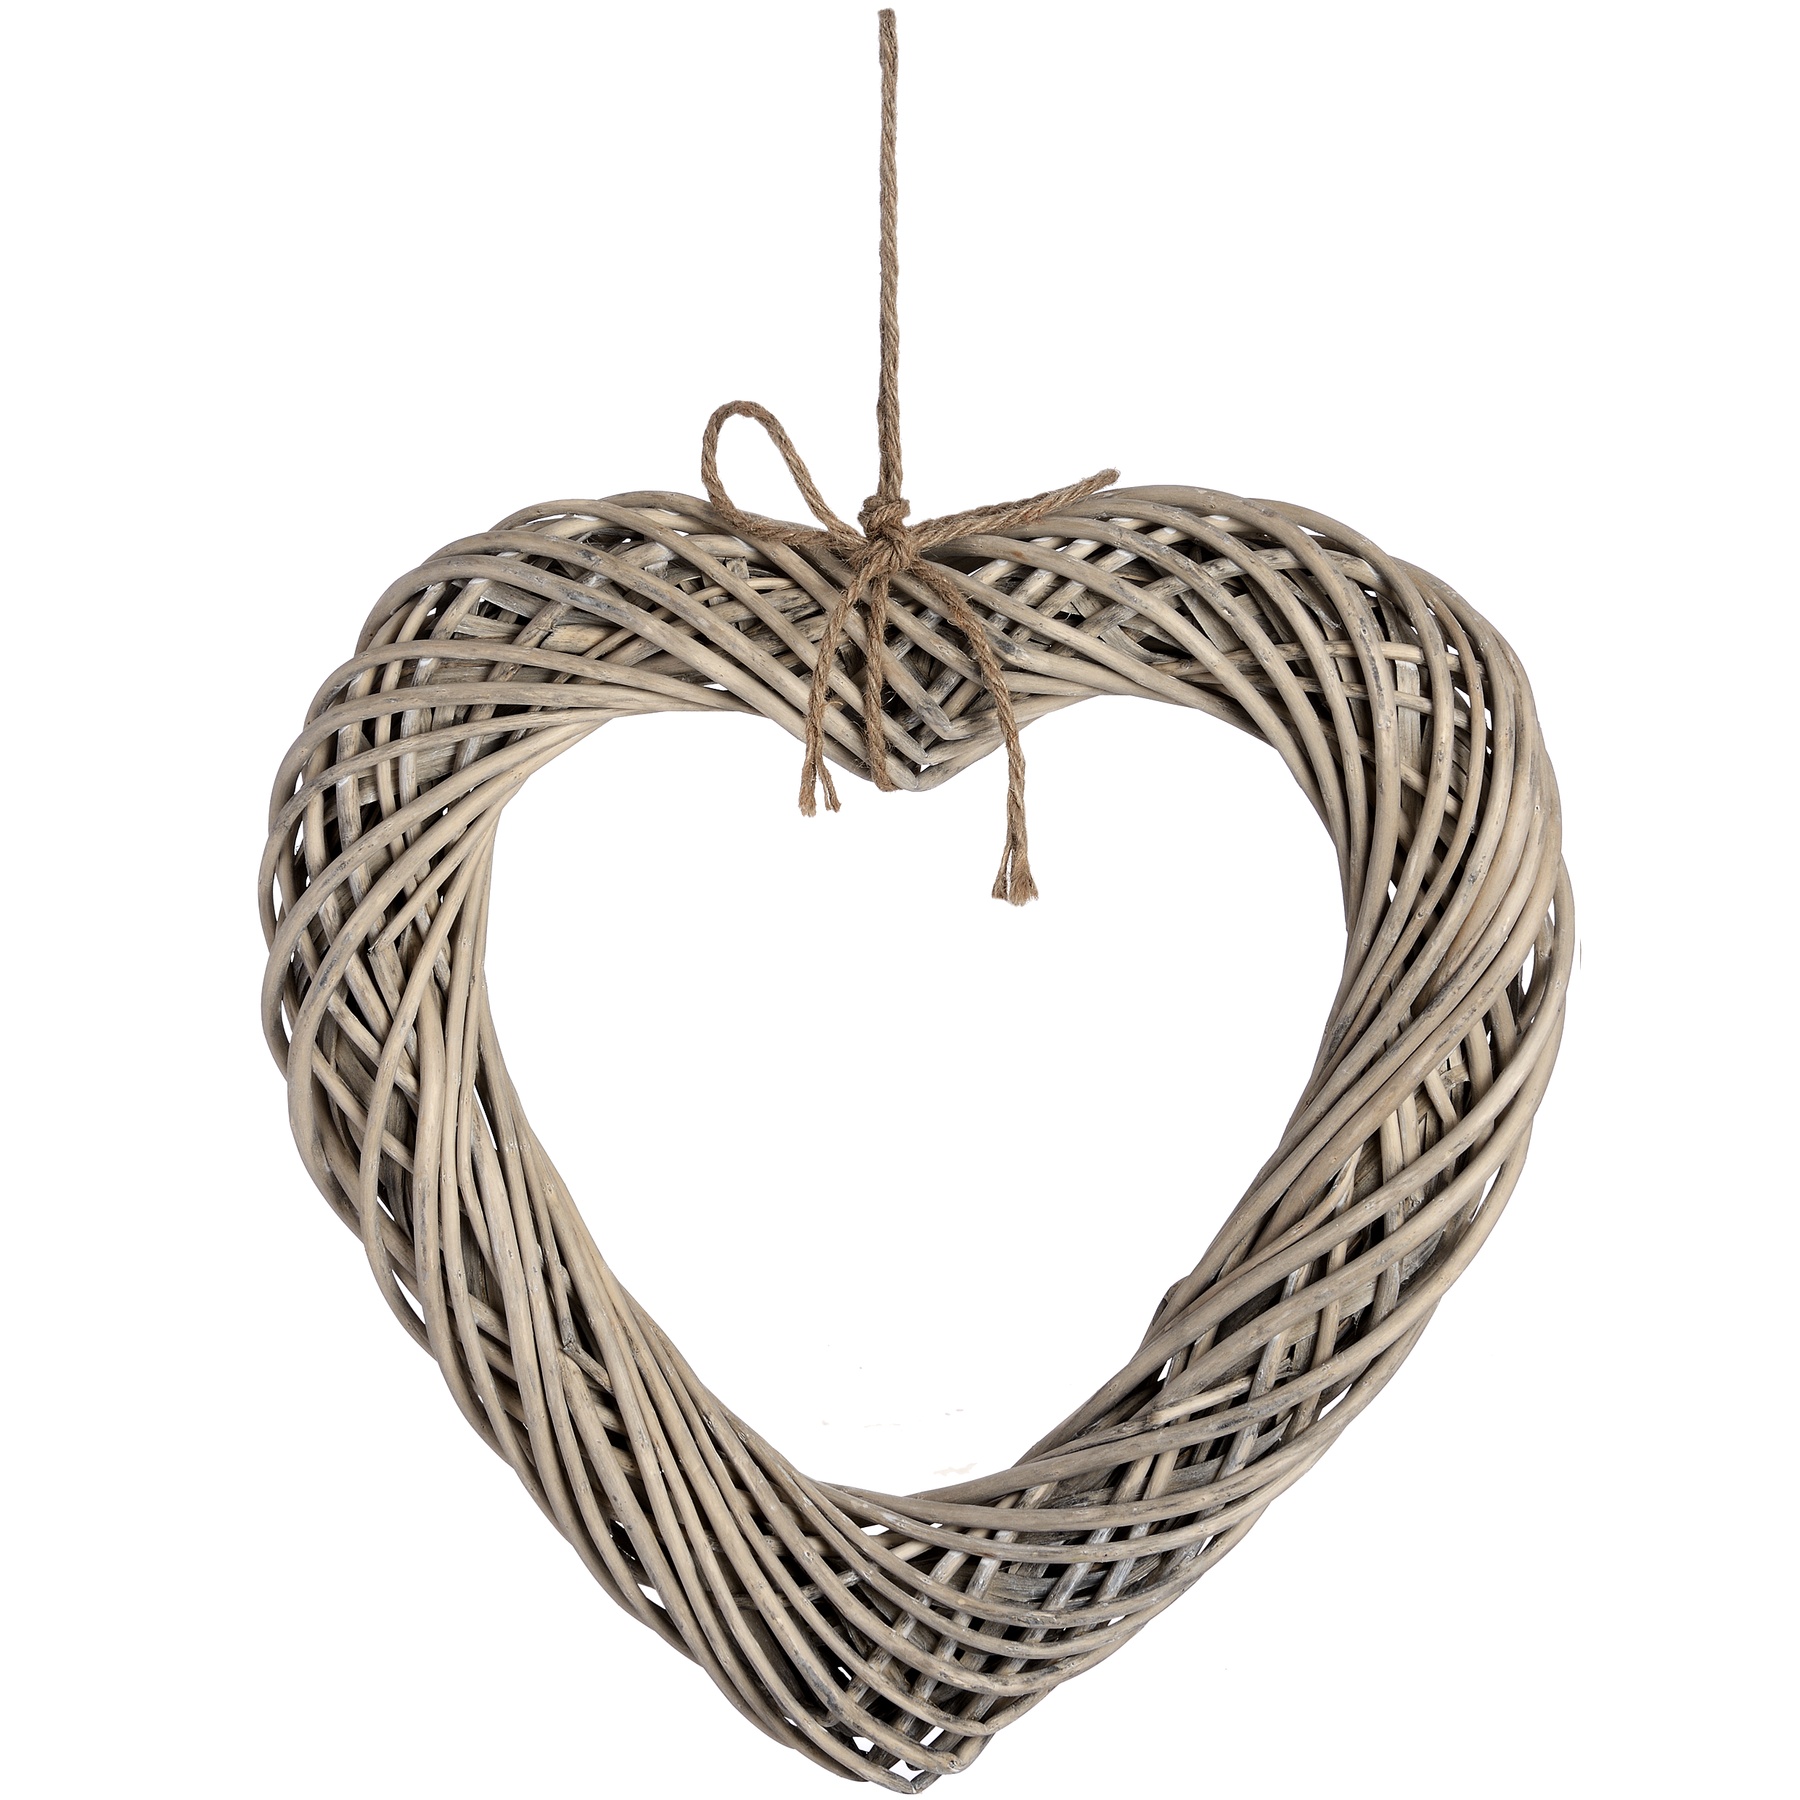 Brown Large Wicker Hanging Heart with Rope Detail - Image 1